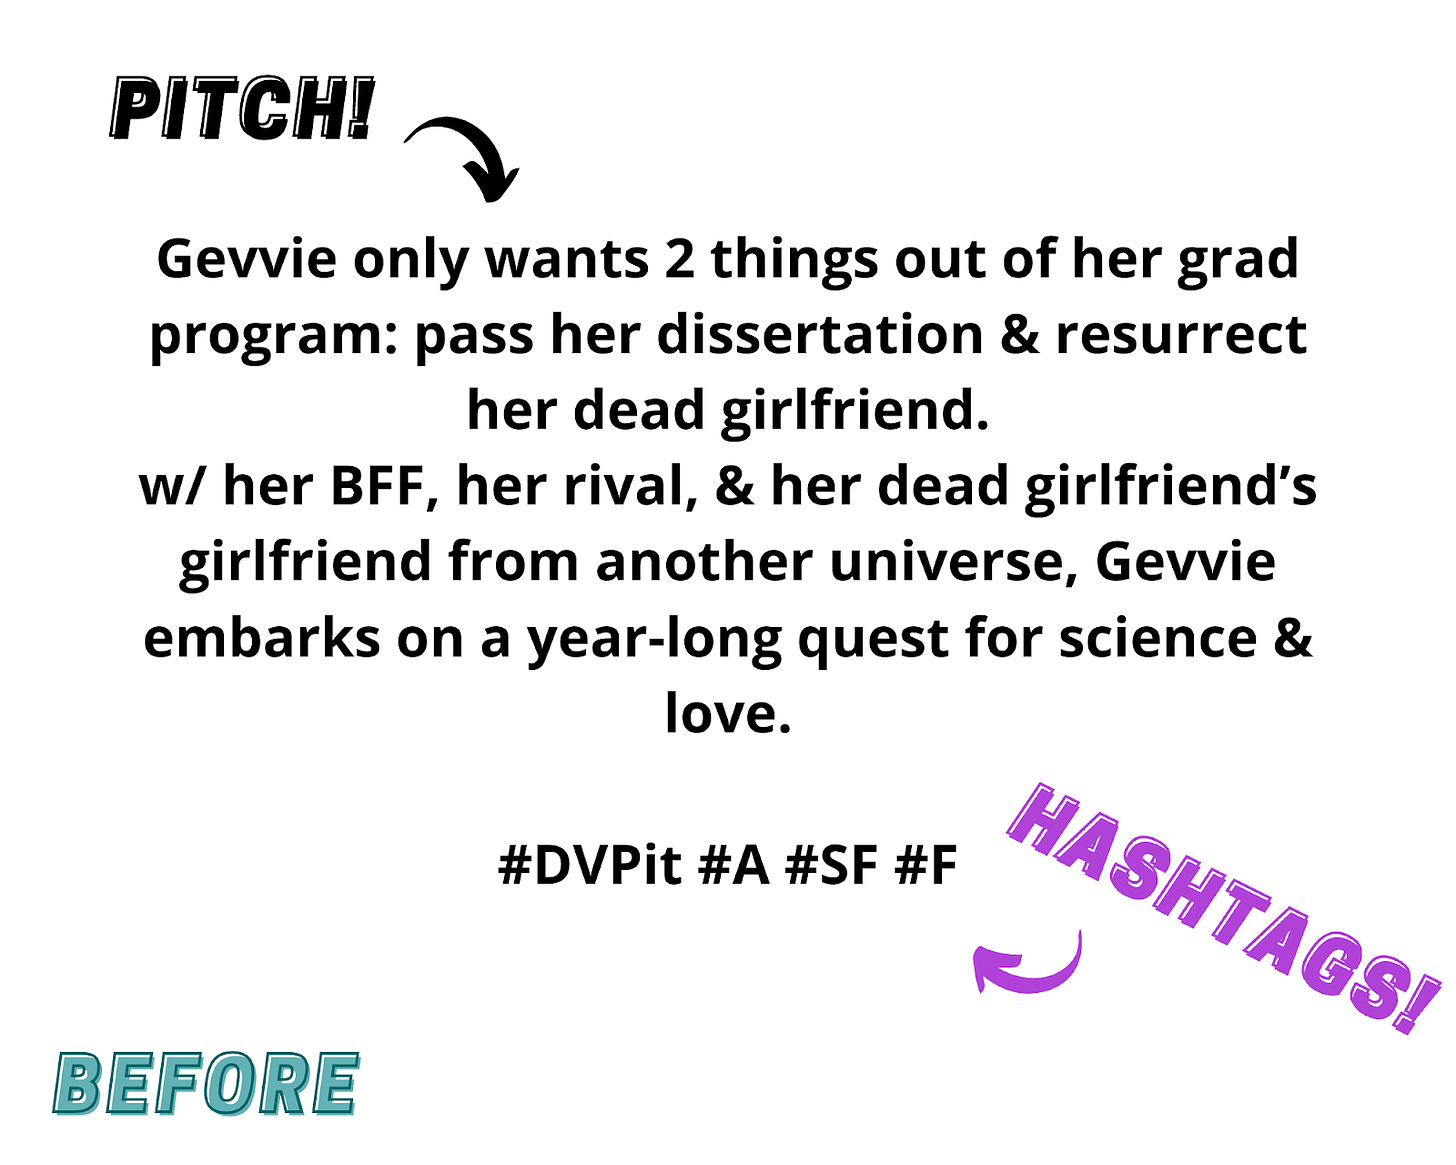 Gevvie only wants 2 things out of her grad program: pass her dissertation & resurrect her dead girlfriend. w/ her BFF, her rival, & her dead girlfriend’s girlfriend from another universe, Gevvie embarks on a year-long quest for science & love.  #DVPit #A #SF #F